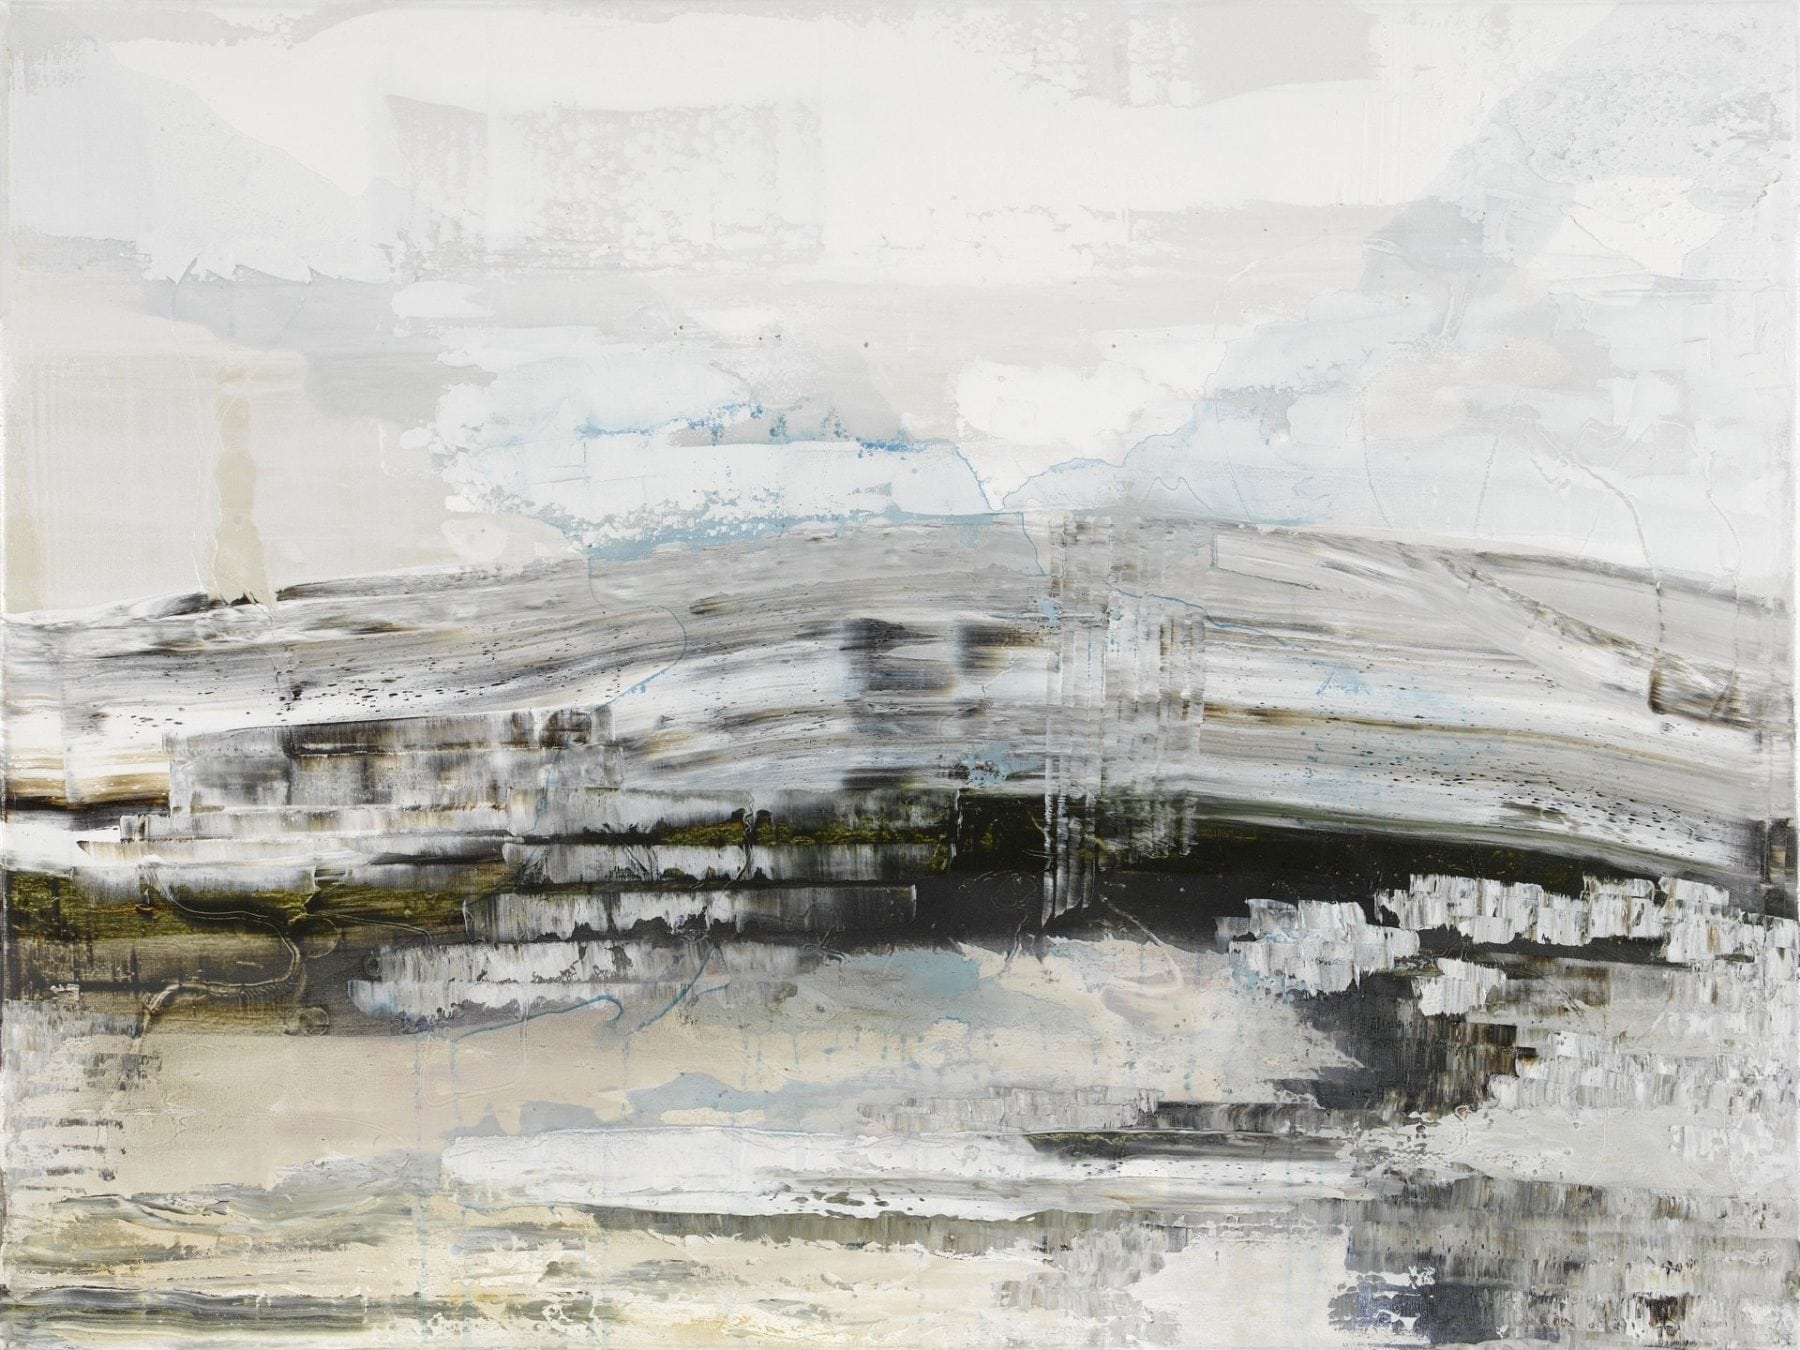 Hill Walking 2 - mixed media with oil on canvas 75 x 100 cm (2 of 2) SOLD available as a Fine Art Print